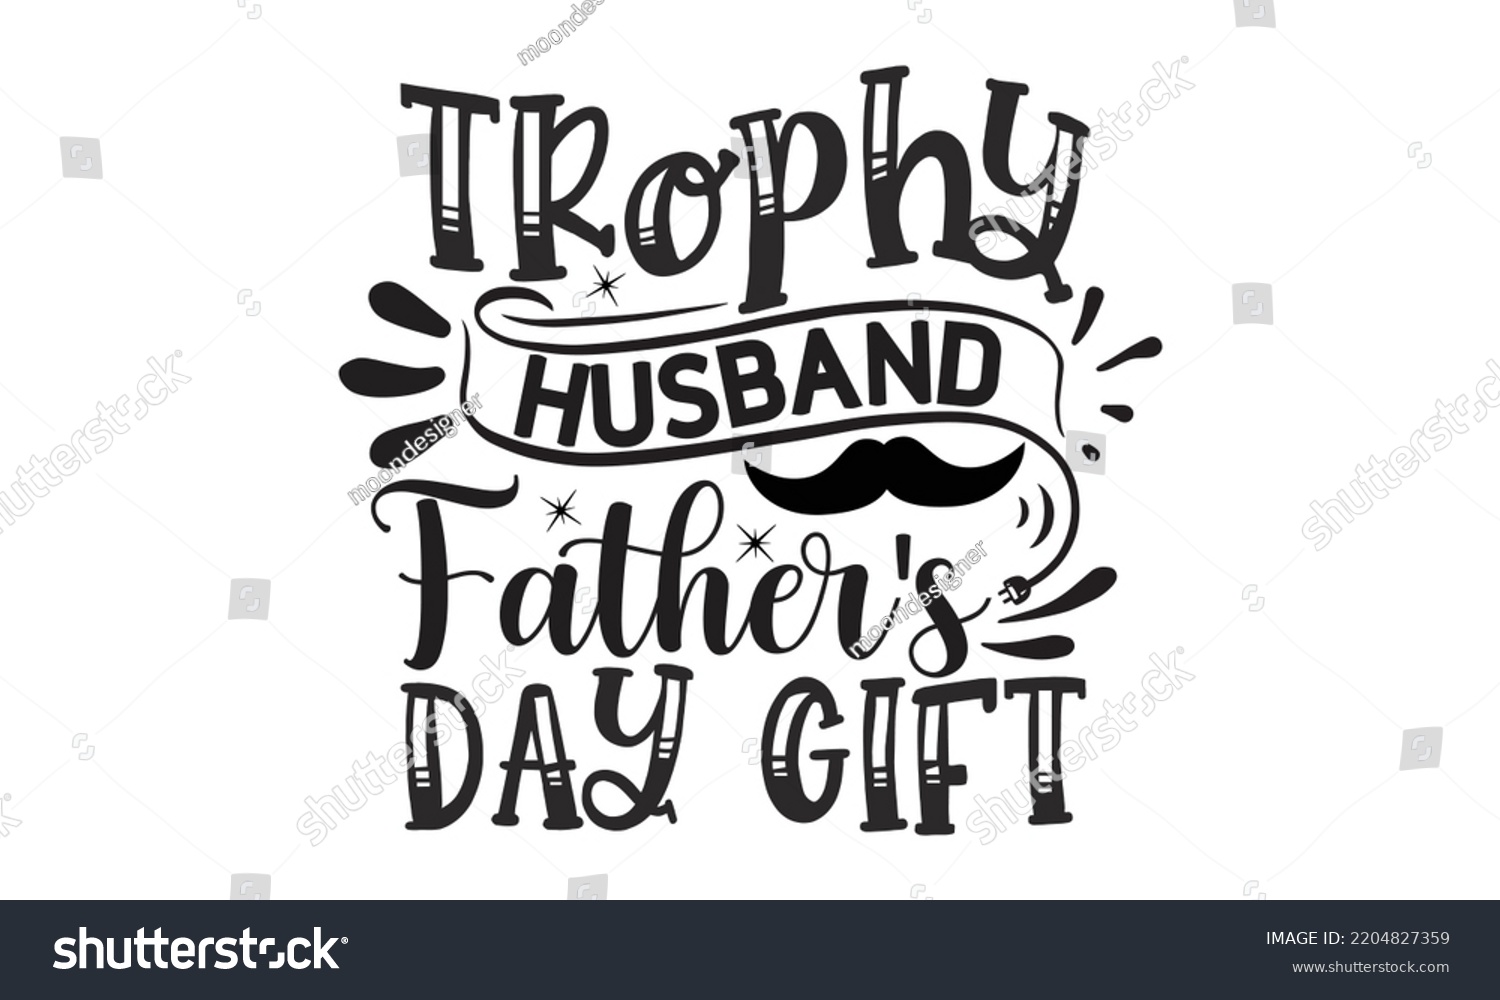 SVG of Trophy Husband Father's Day Gif - father Typography t-shirt design, Hand drawn lettering father's quote in modern calligraphy style, Handwritten vector sign, SVG, EPS 10 svg